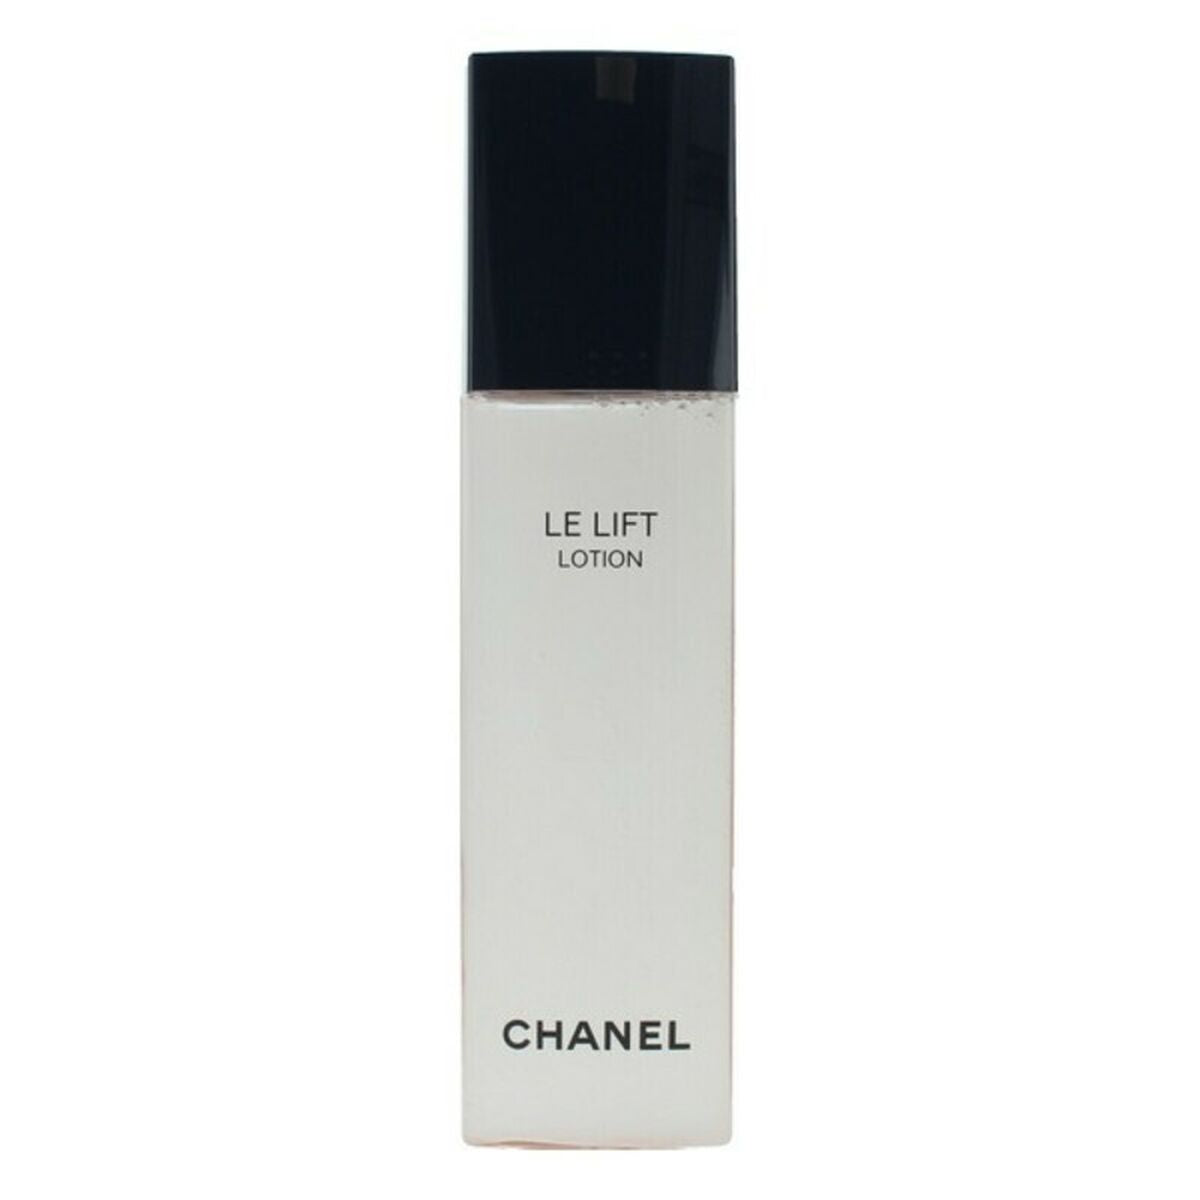 Smoothing and Firming Lotion Le Lift Chanel Le Lift 150 ml-0